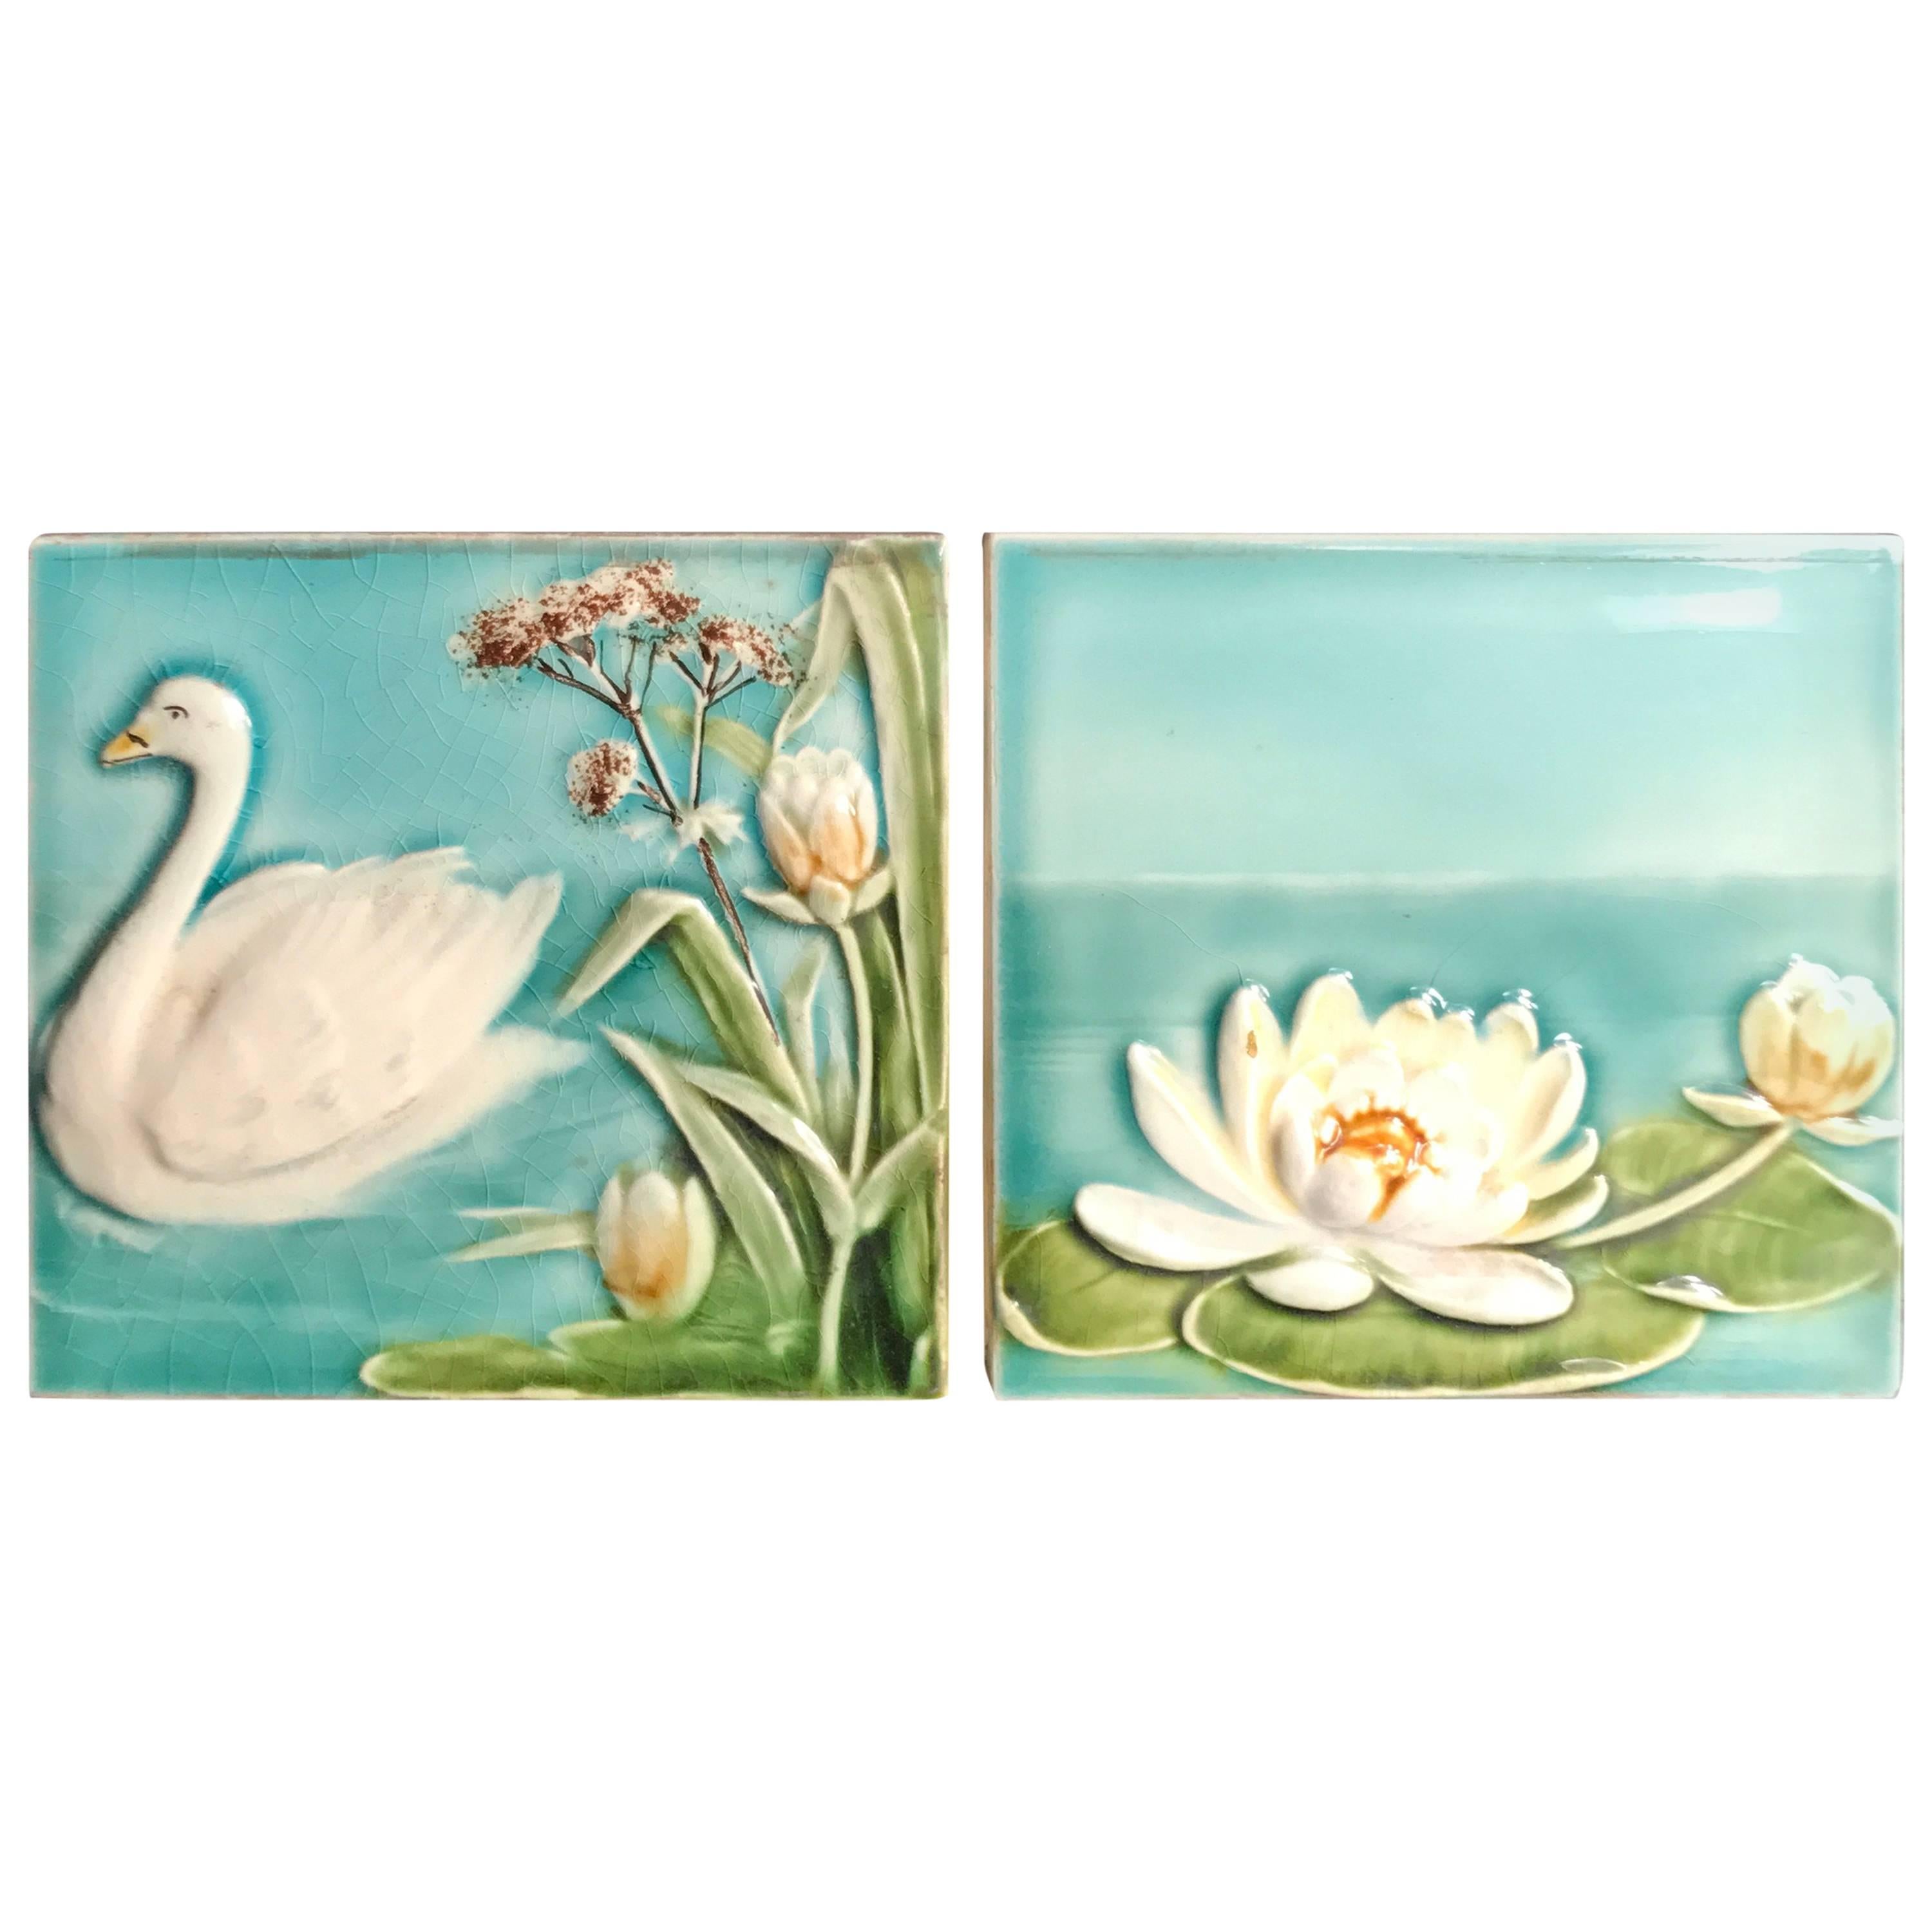 Antique Hand-Painted Swan and Lotus Tiles Brilliant Blue Colors